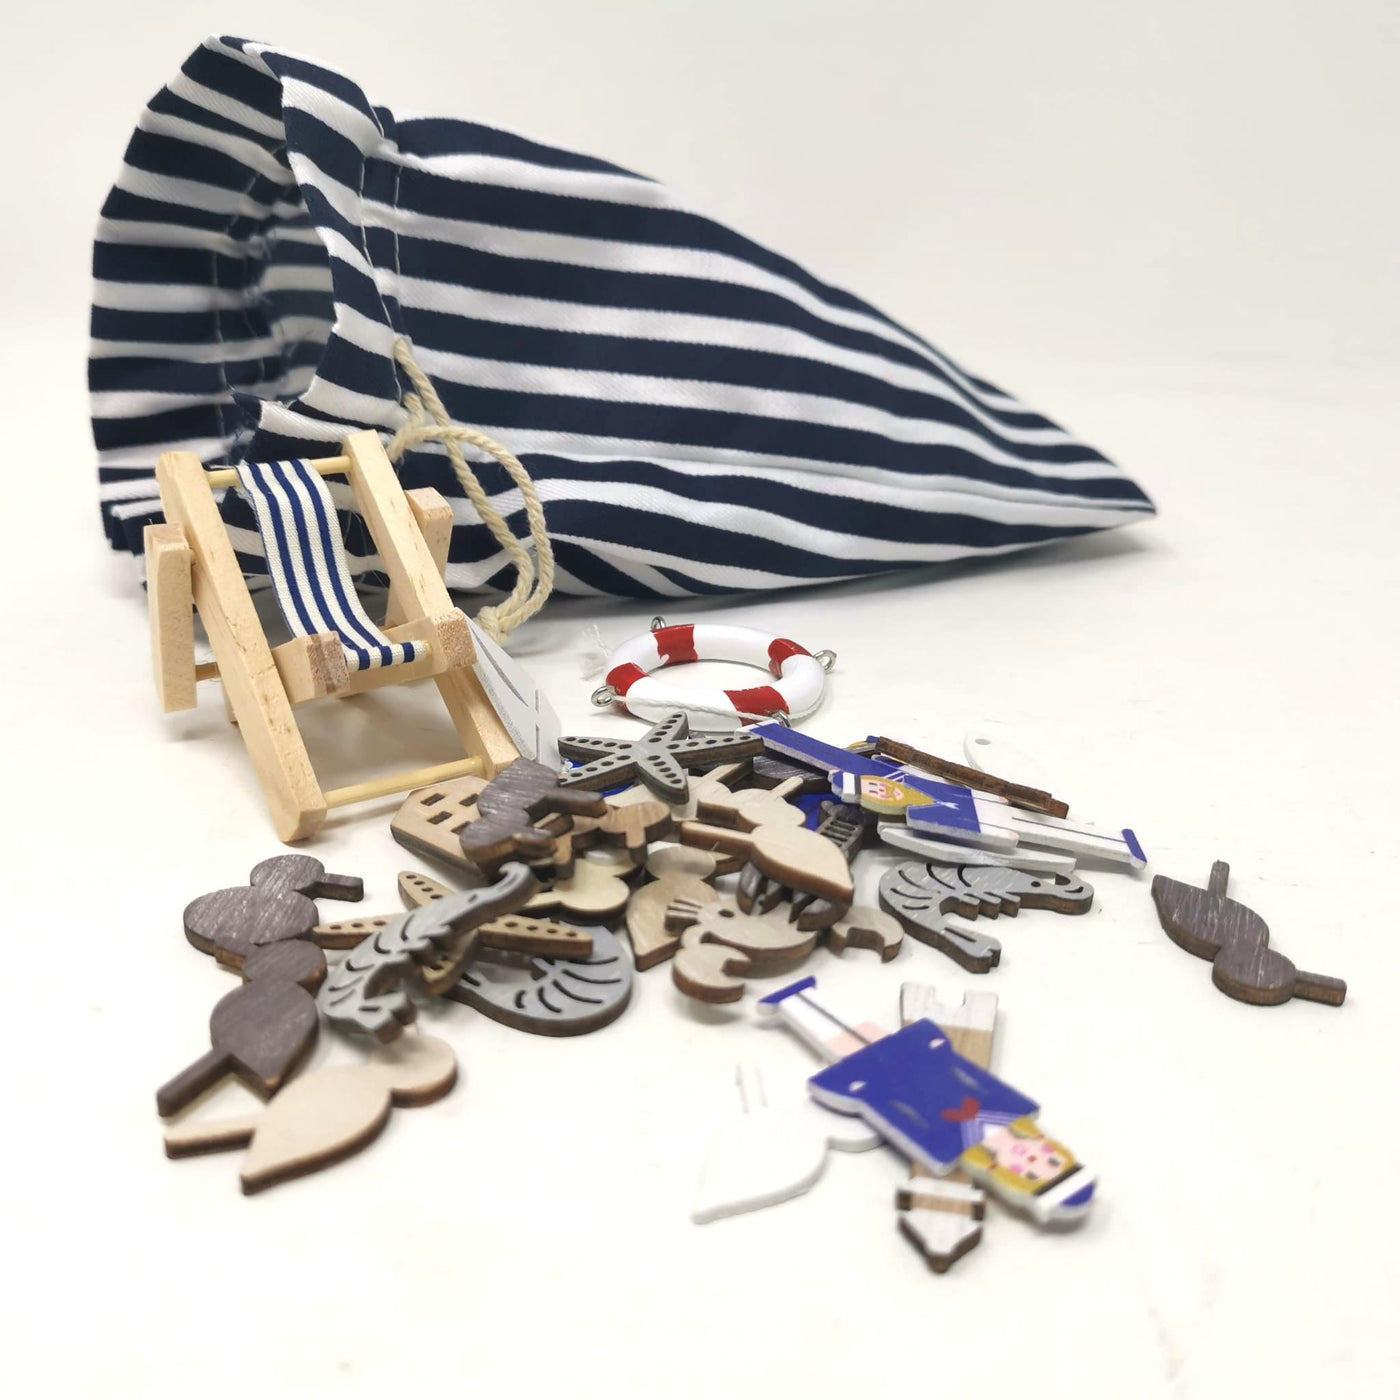 Summer Deck Chair and Loose Seaside Play Pieces - Loose Parts Set Perfect For Sensory Play & Crafts.